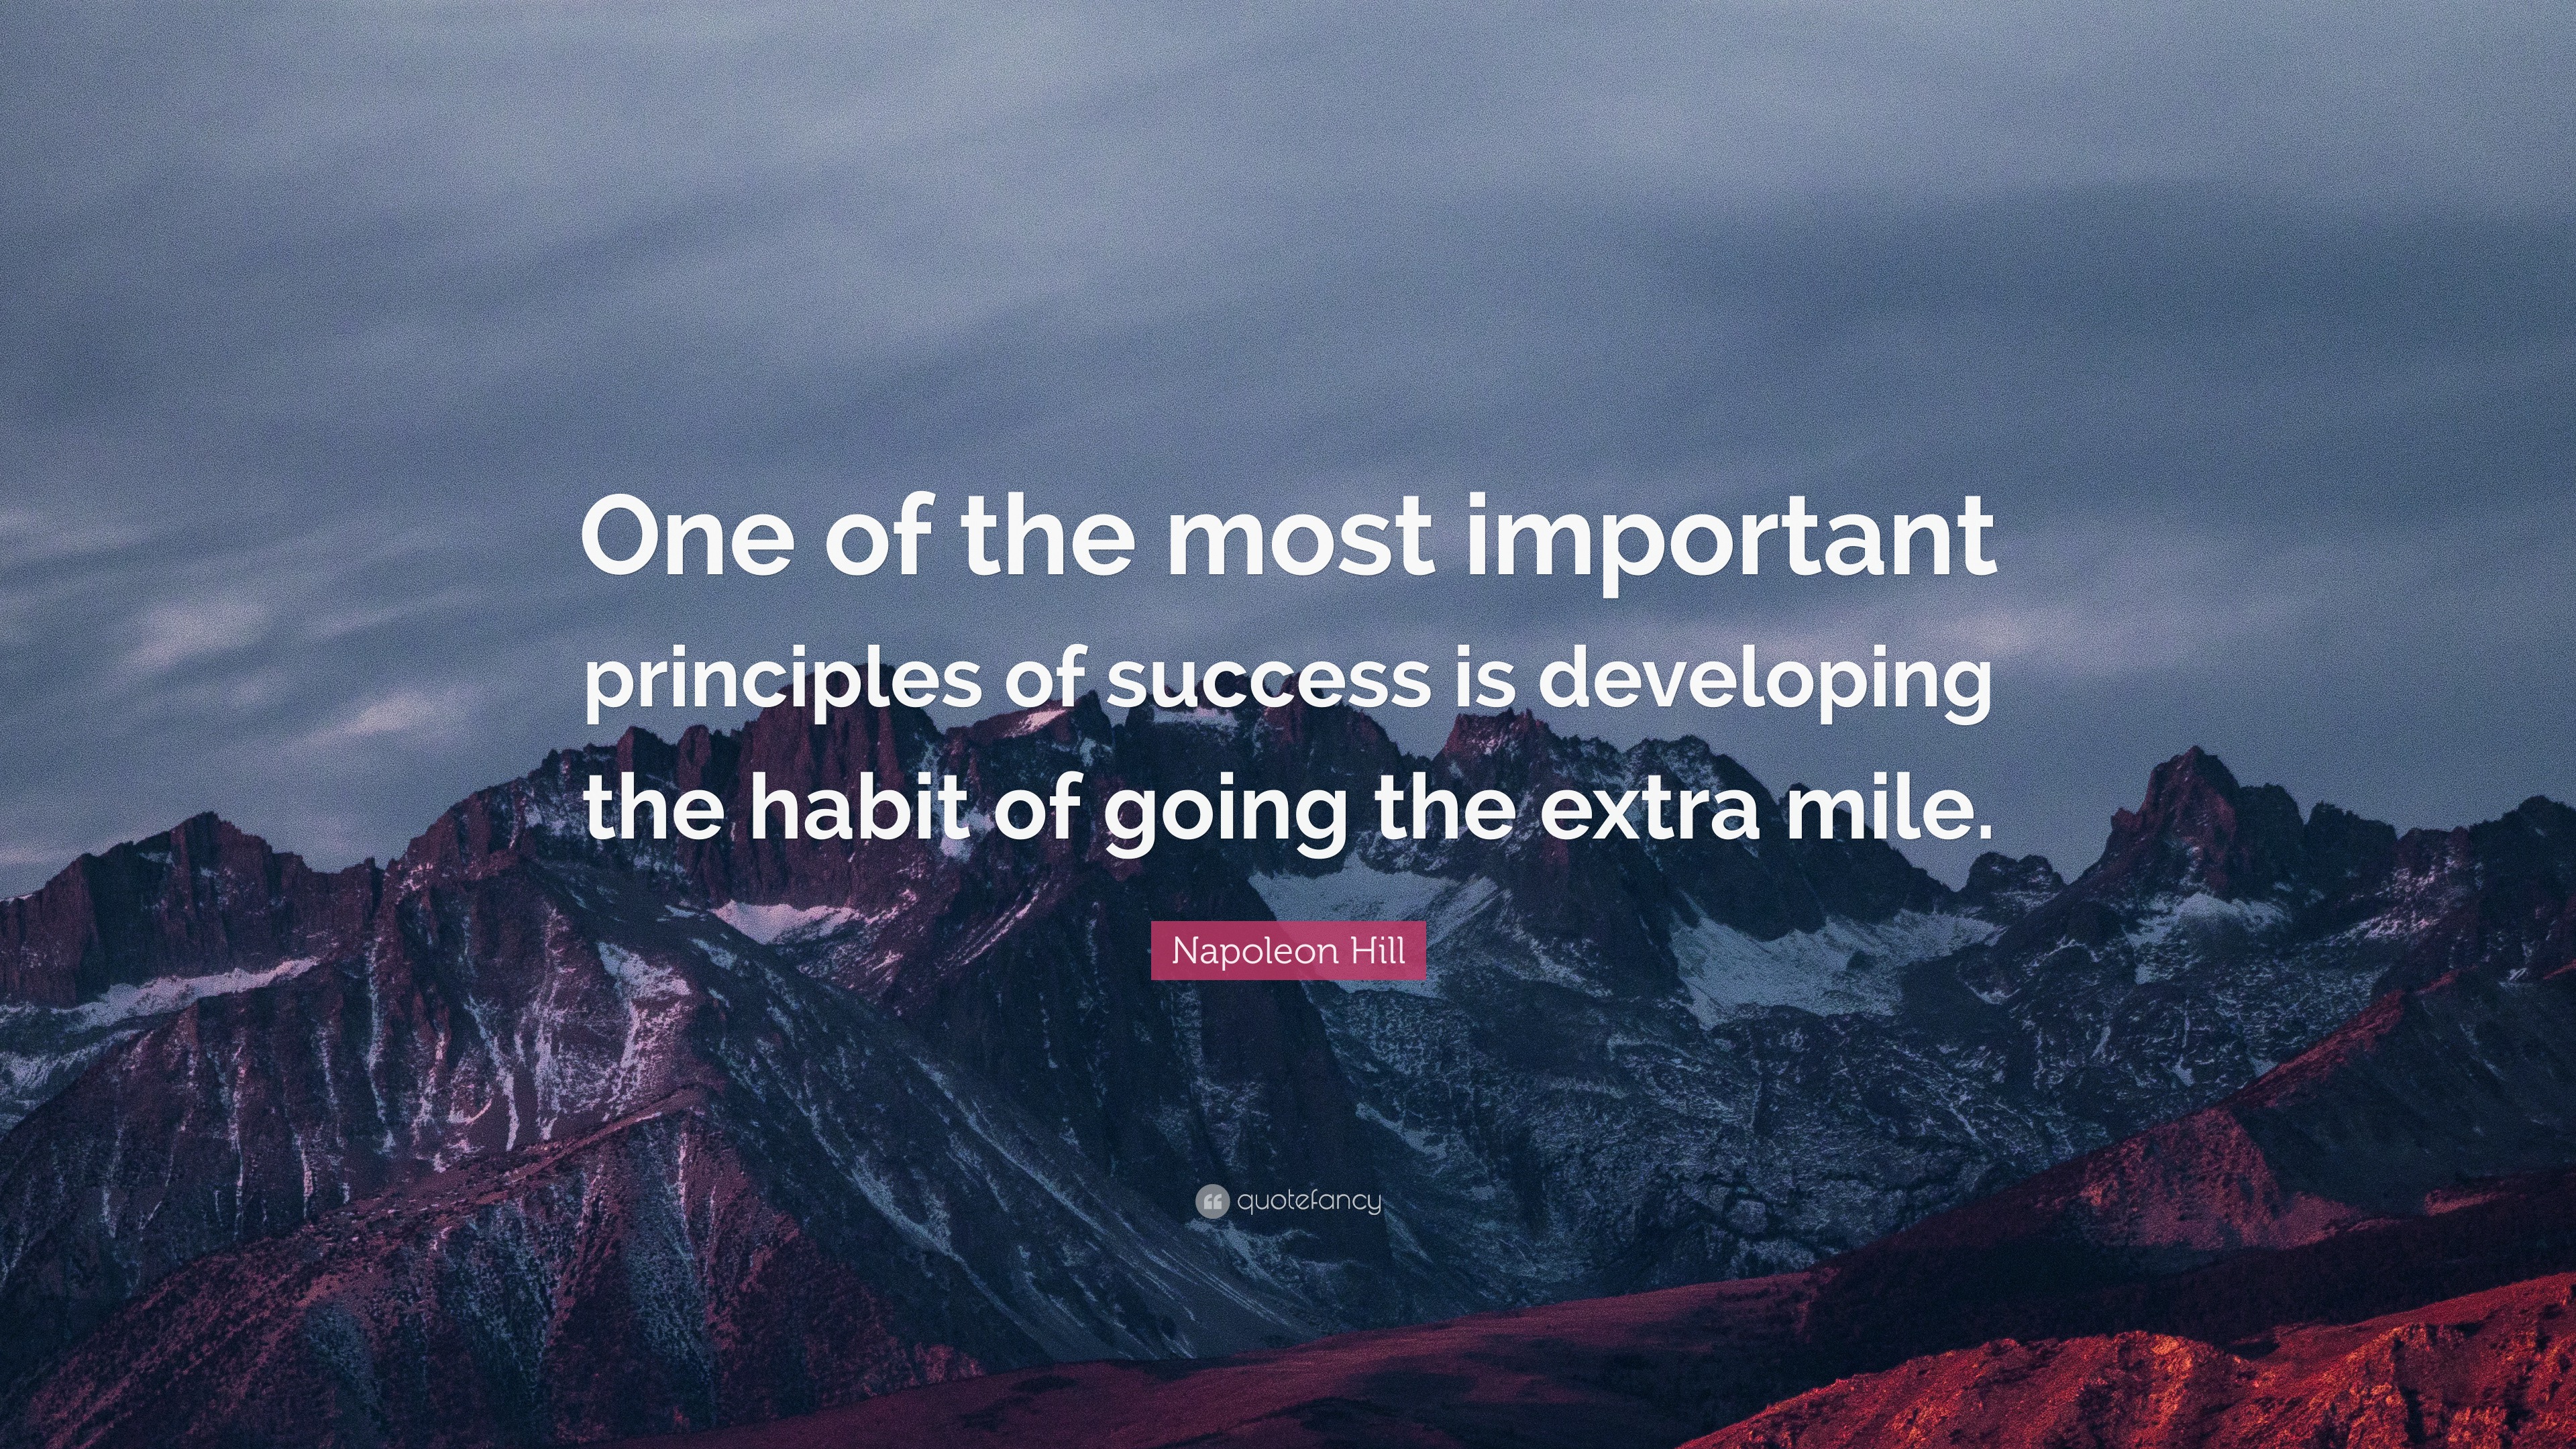 napoleon-hill-quote-one-of-the-most-important-principles-of-success